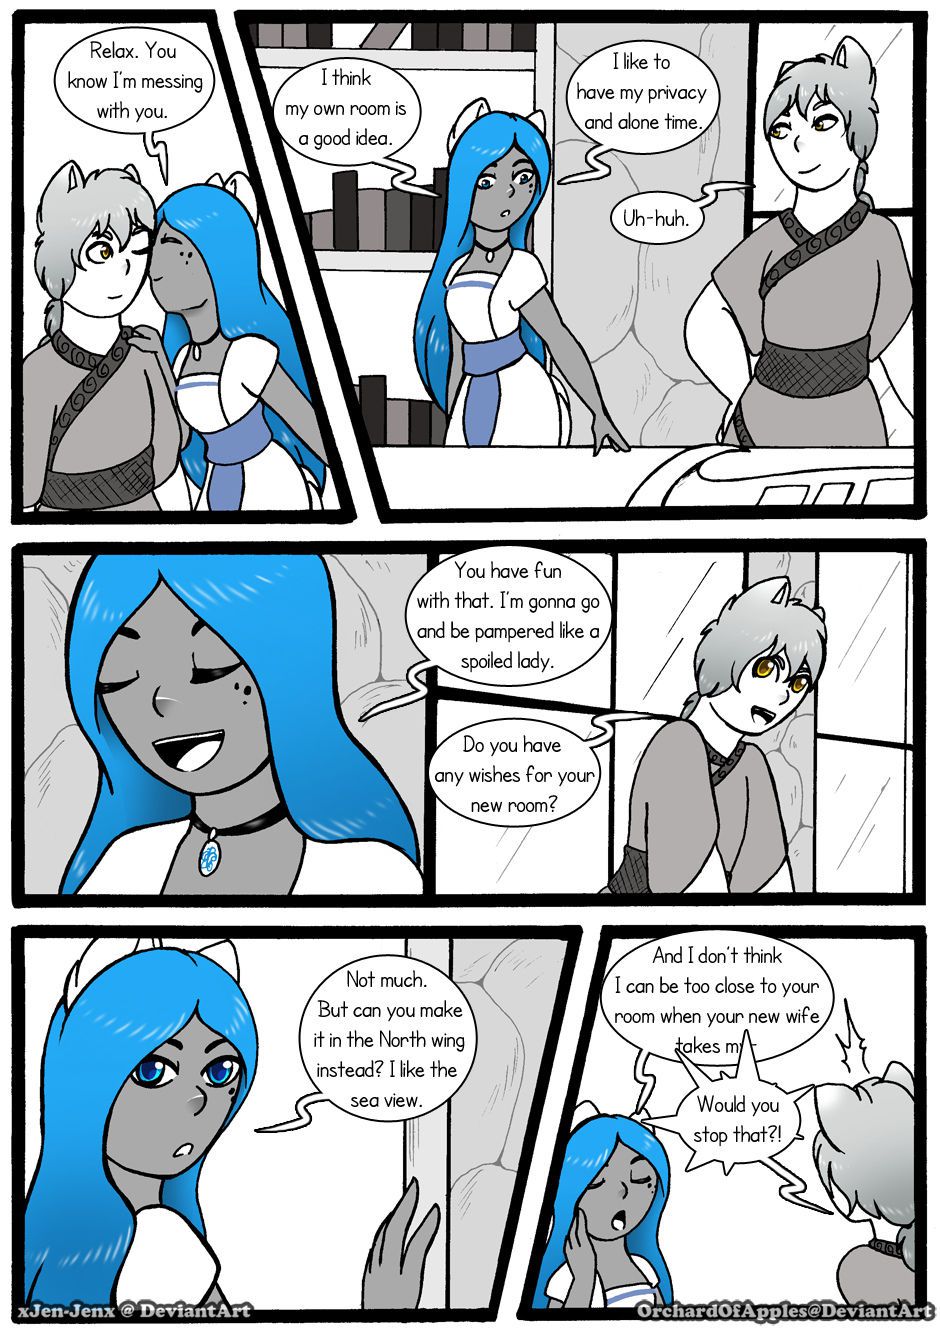 [Jeny-jen94] Between Kings and Queens [Ongoing] 208